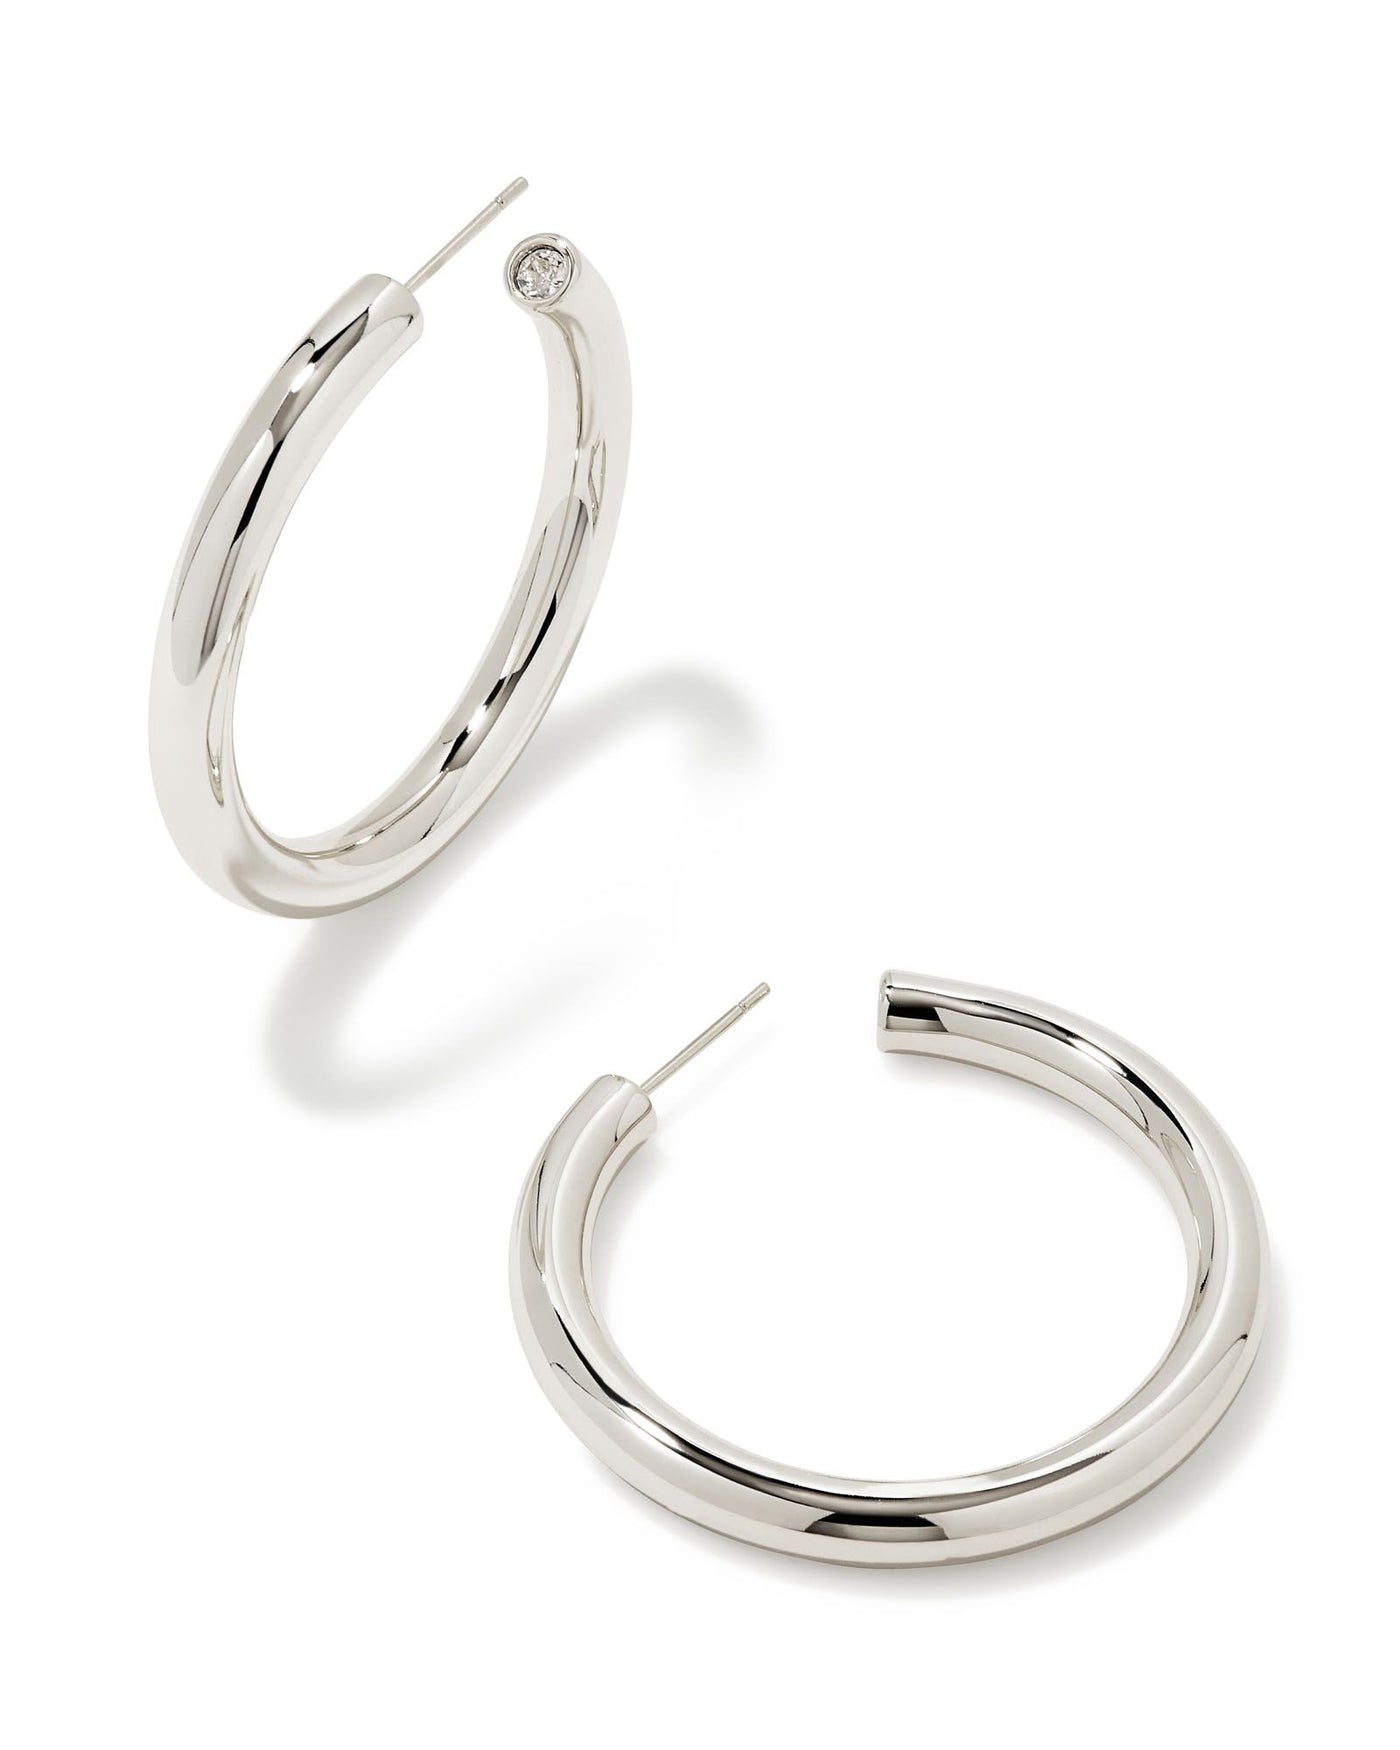 Kendra Scott Colette Large Hoop Earrings-Earrings-Kendra Scott-Market Street Nest, Fashionable Clothing, Shoes and Home Décor Located in Mabank, TX